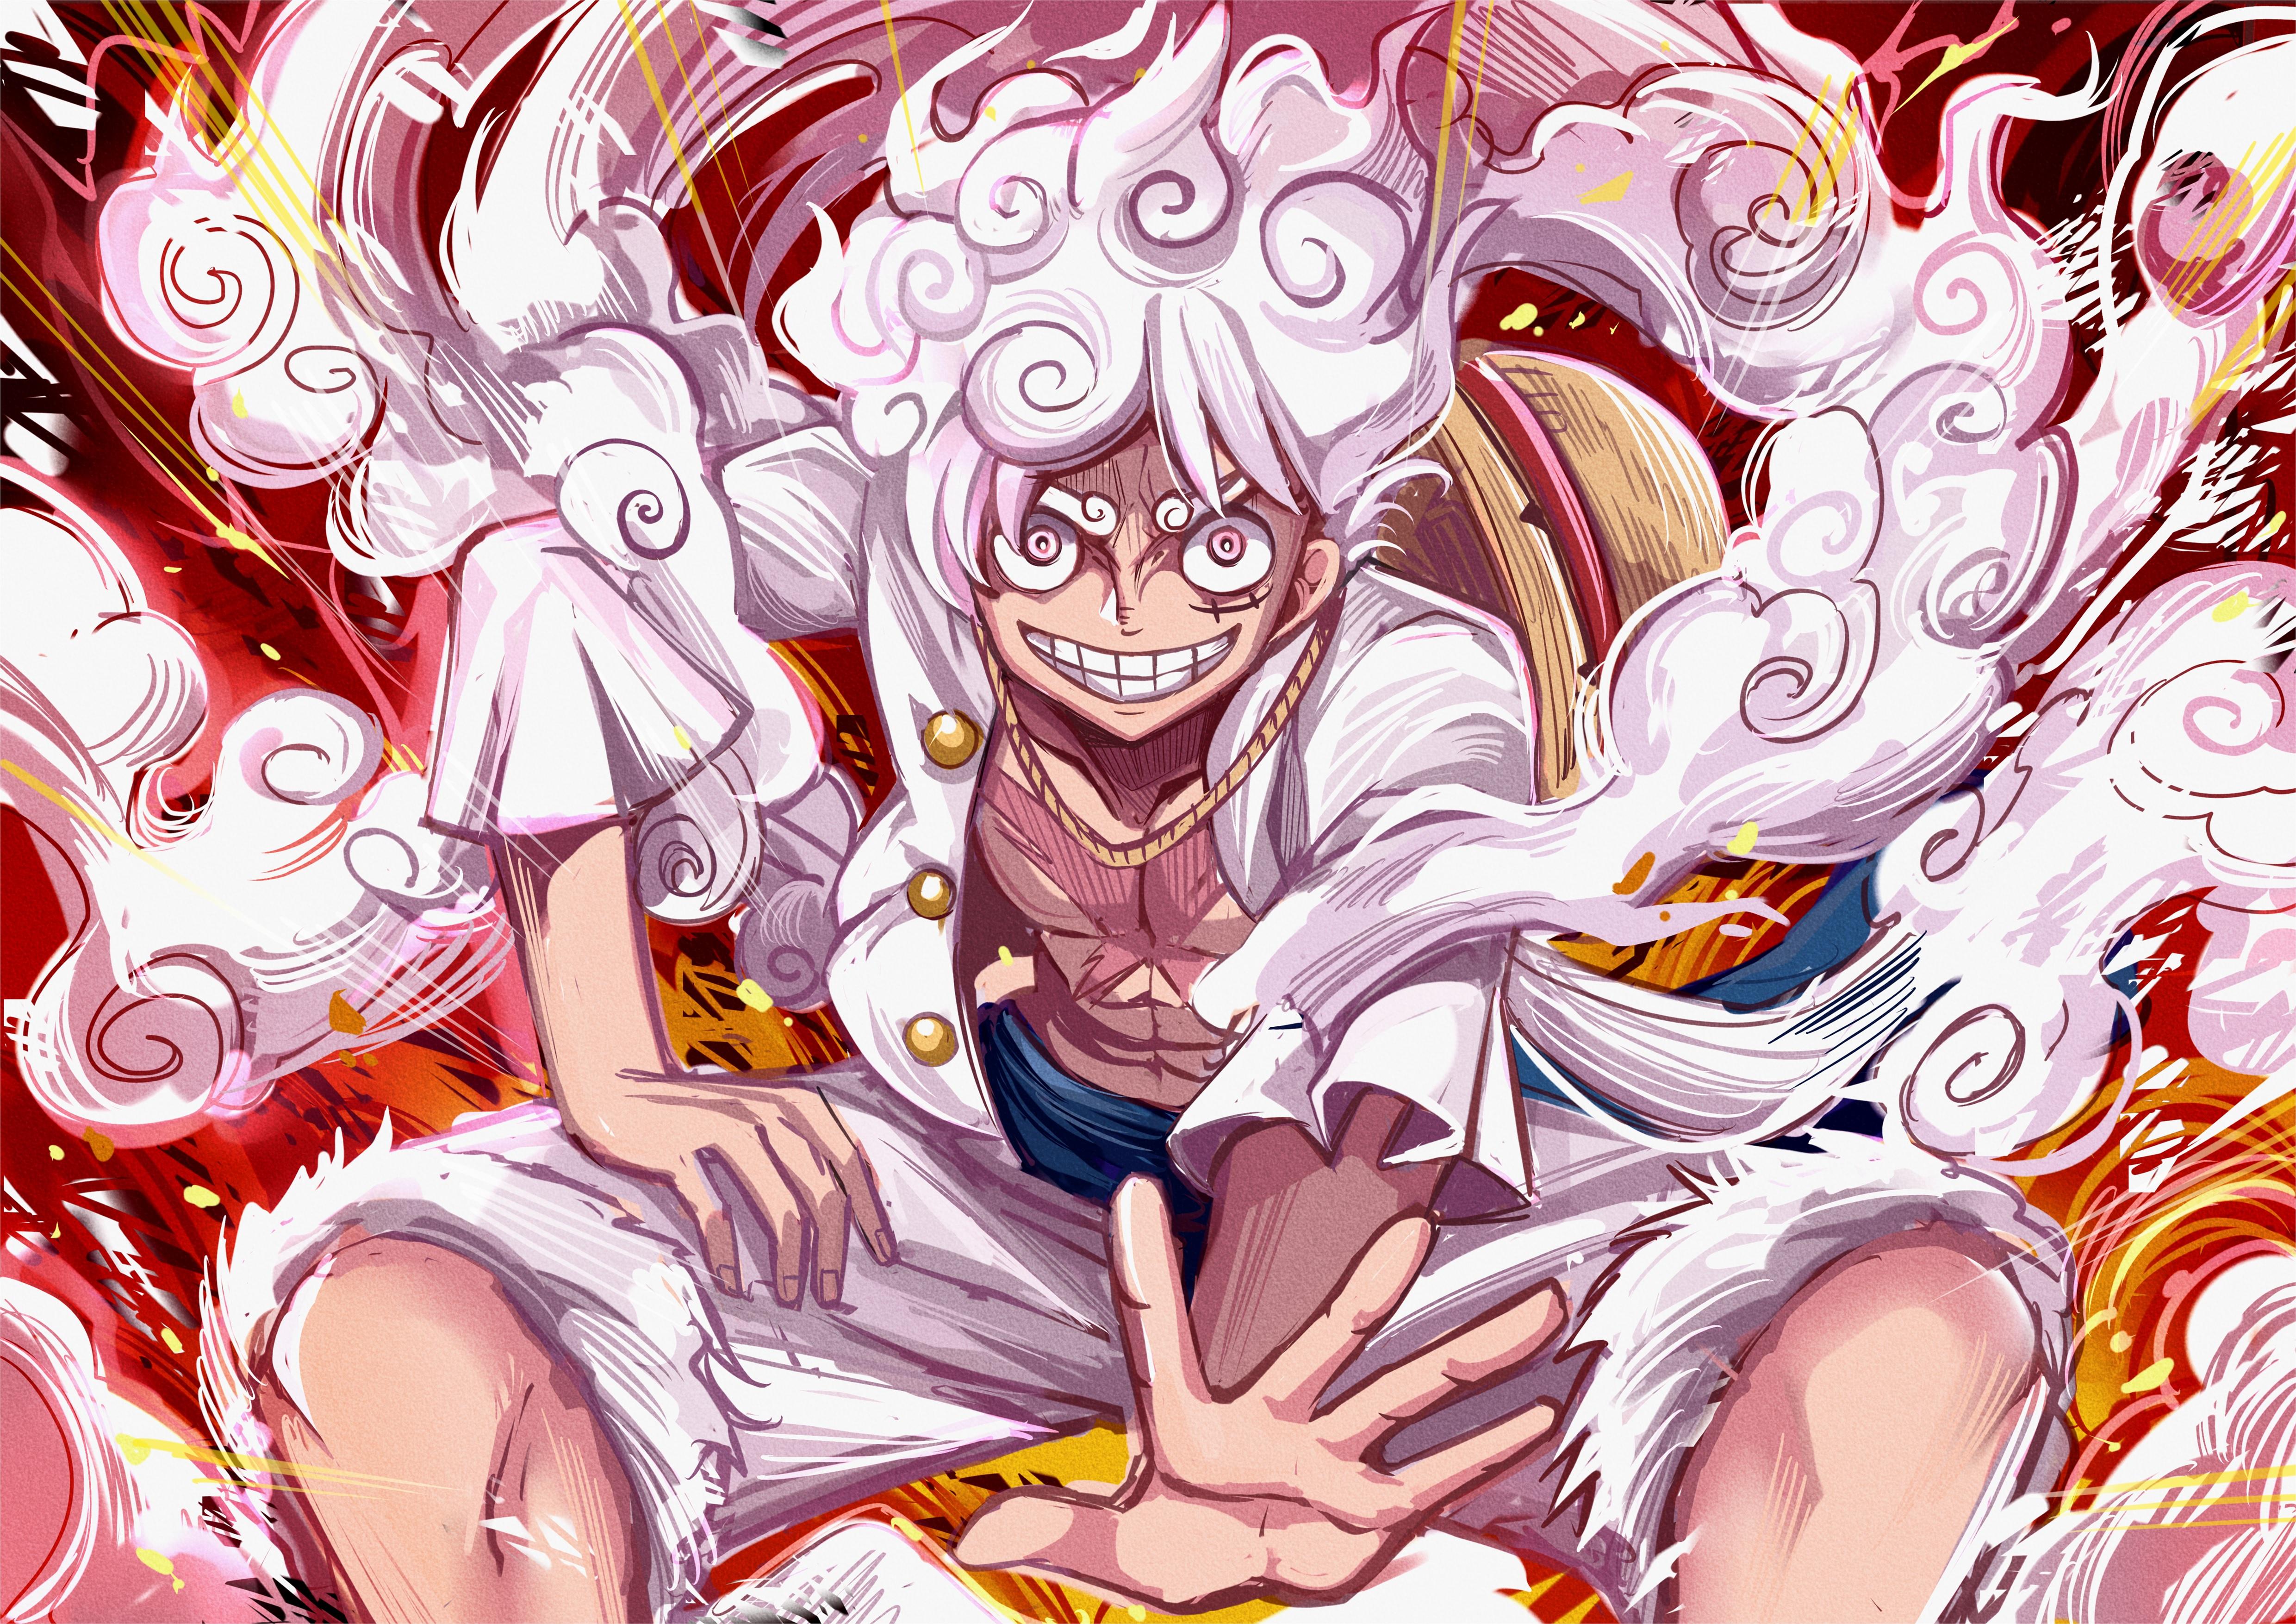 Gear 5 Luffy Wallpapers - Wallpaper Cave